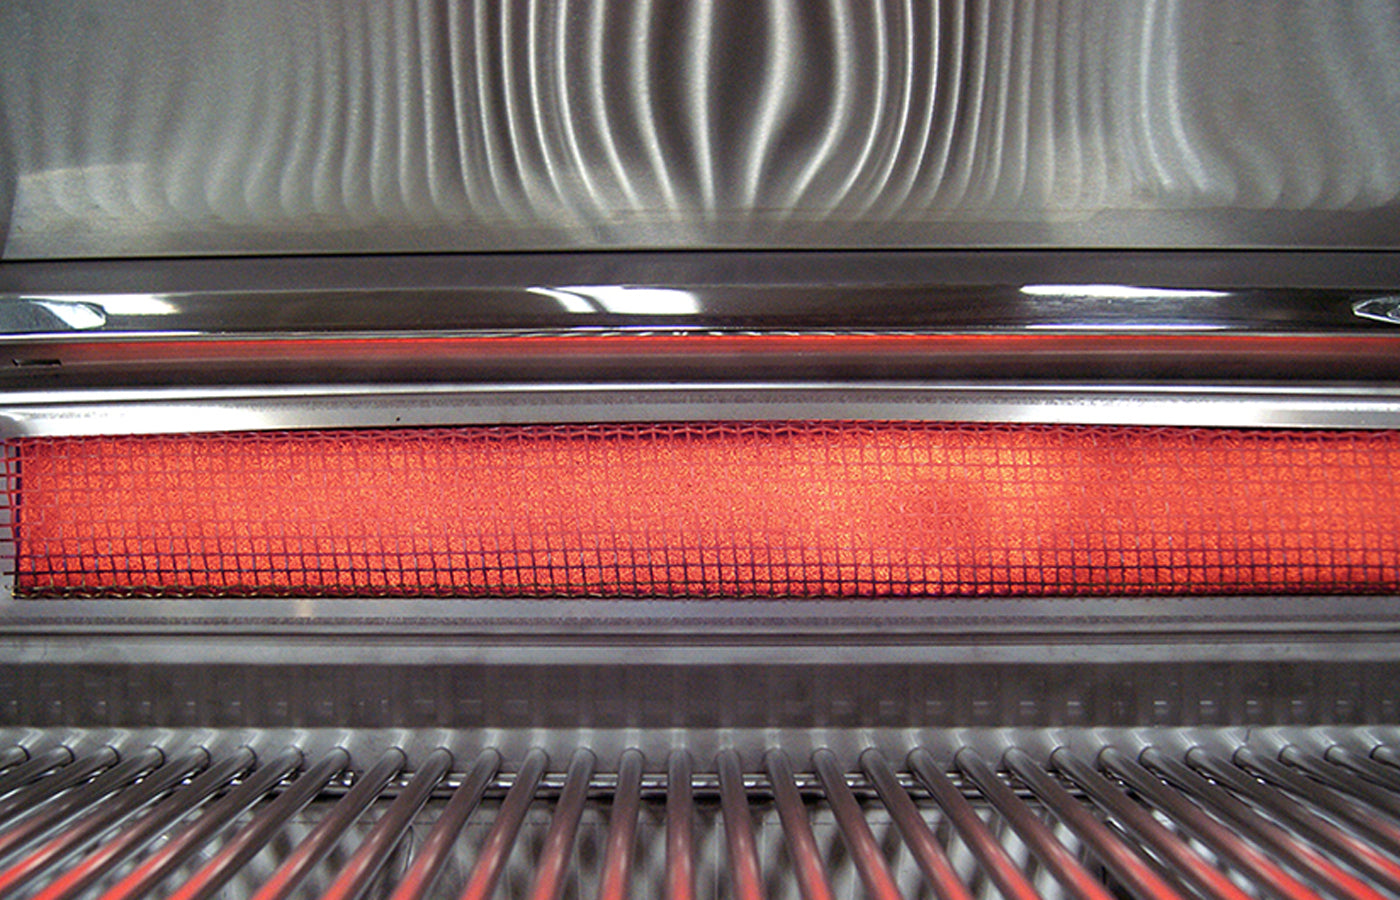 FireMagic Echelon E660i Built-In 30 in. Grill with Analog Thermometer